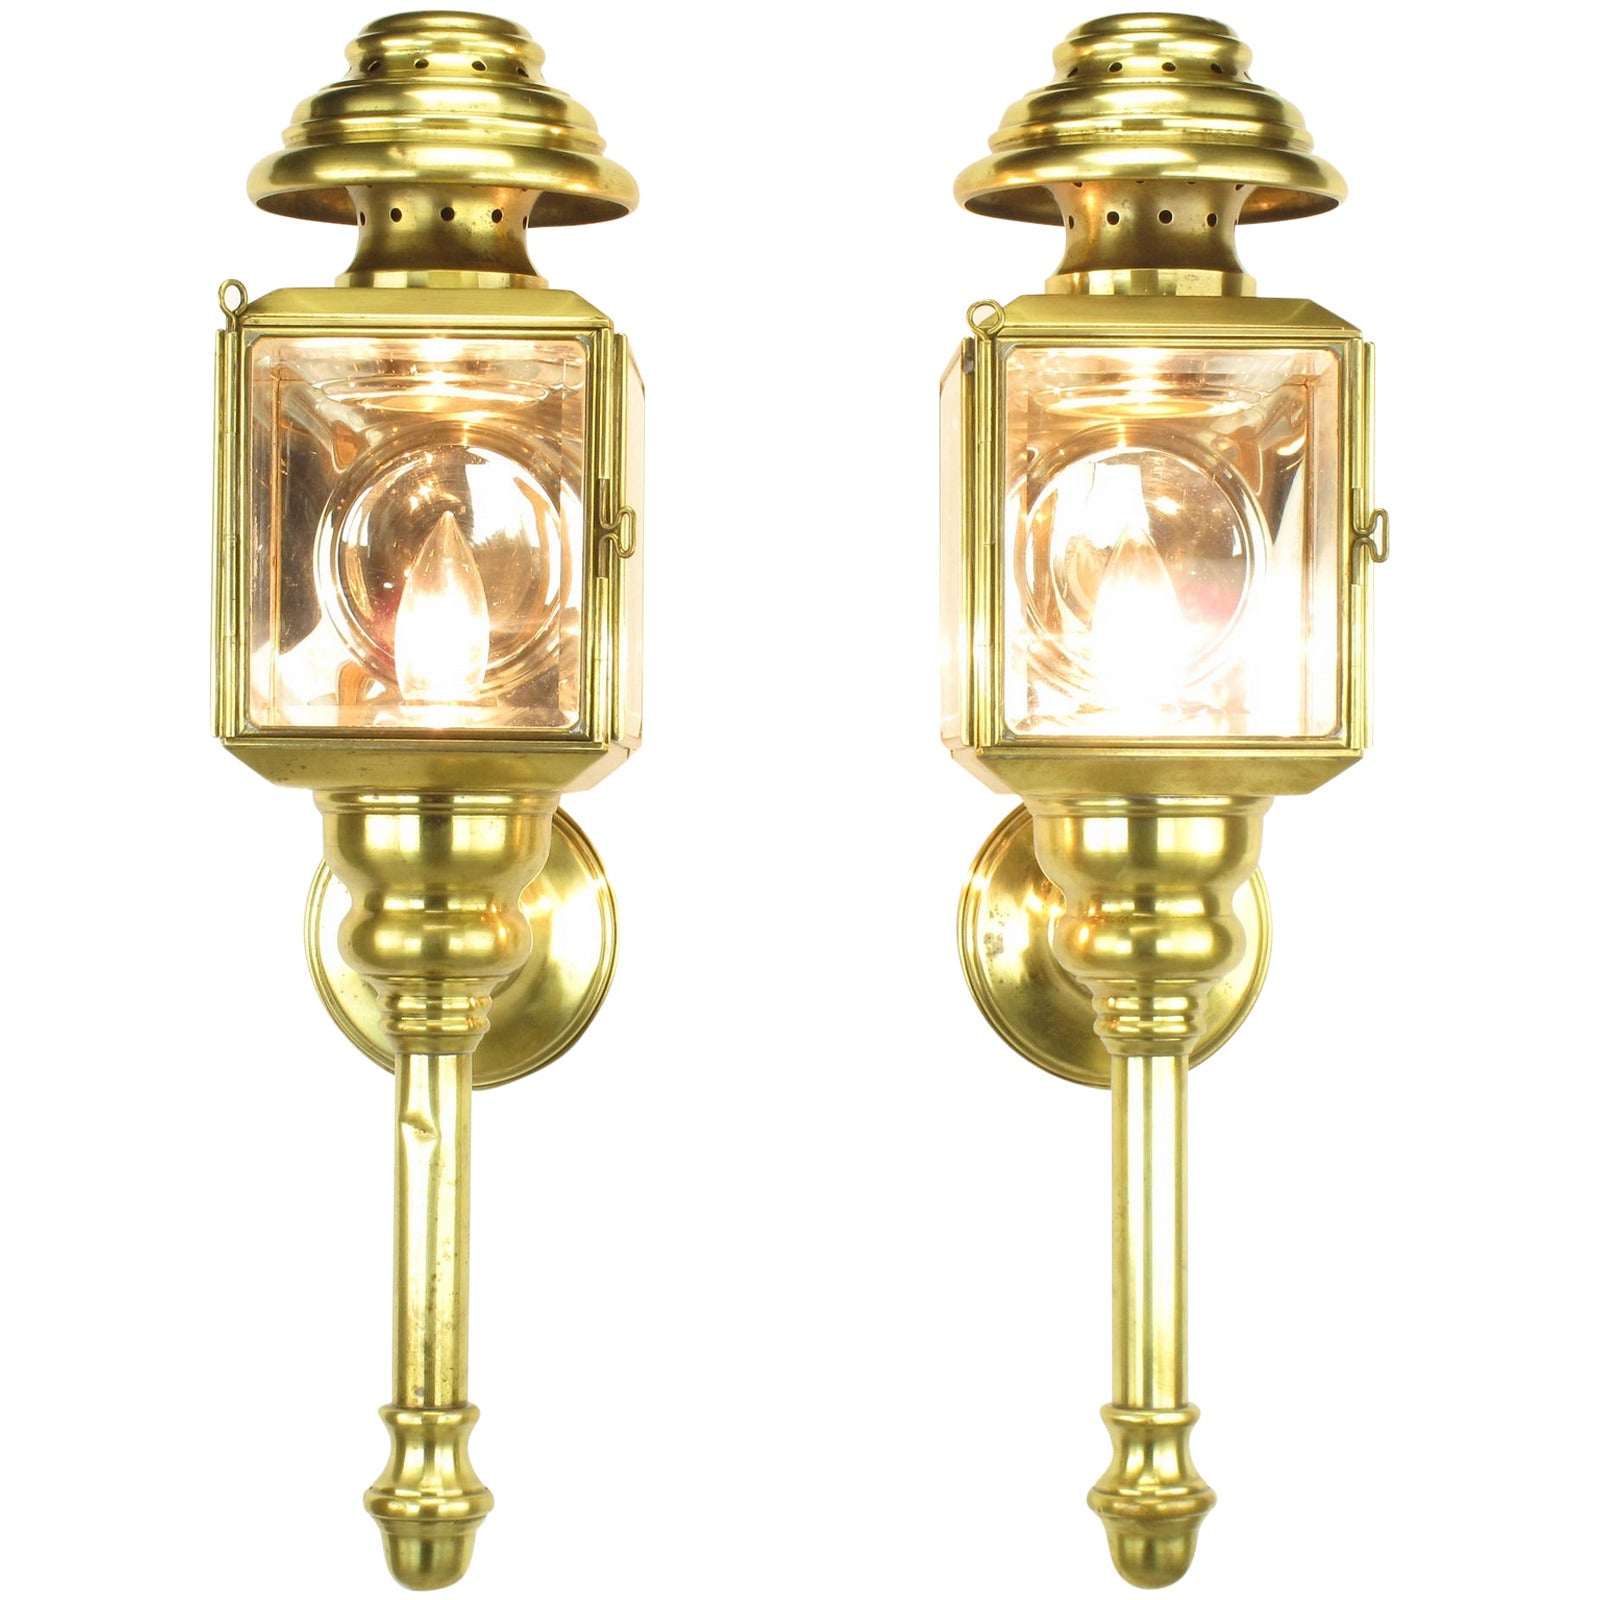 Pair of circa 1900s Brass and Beveled Glass Electrified Coach Lights